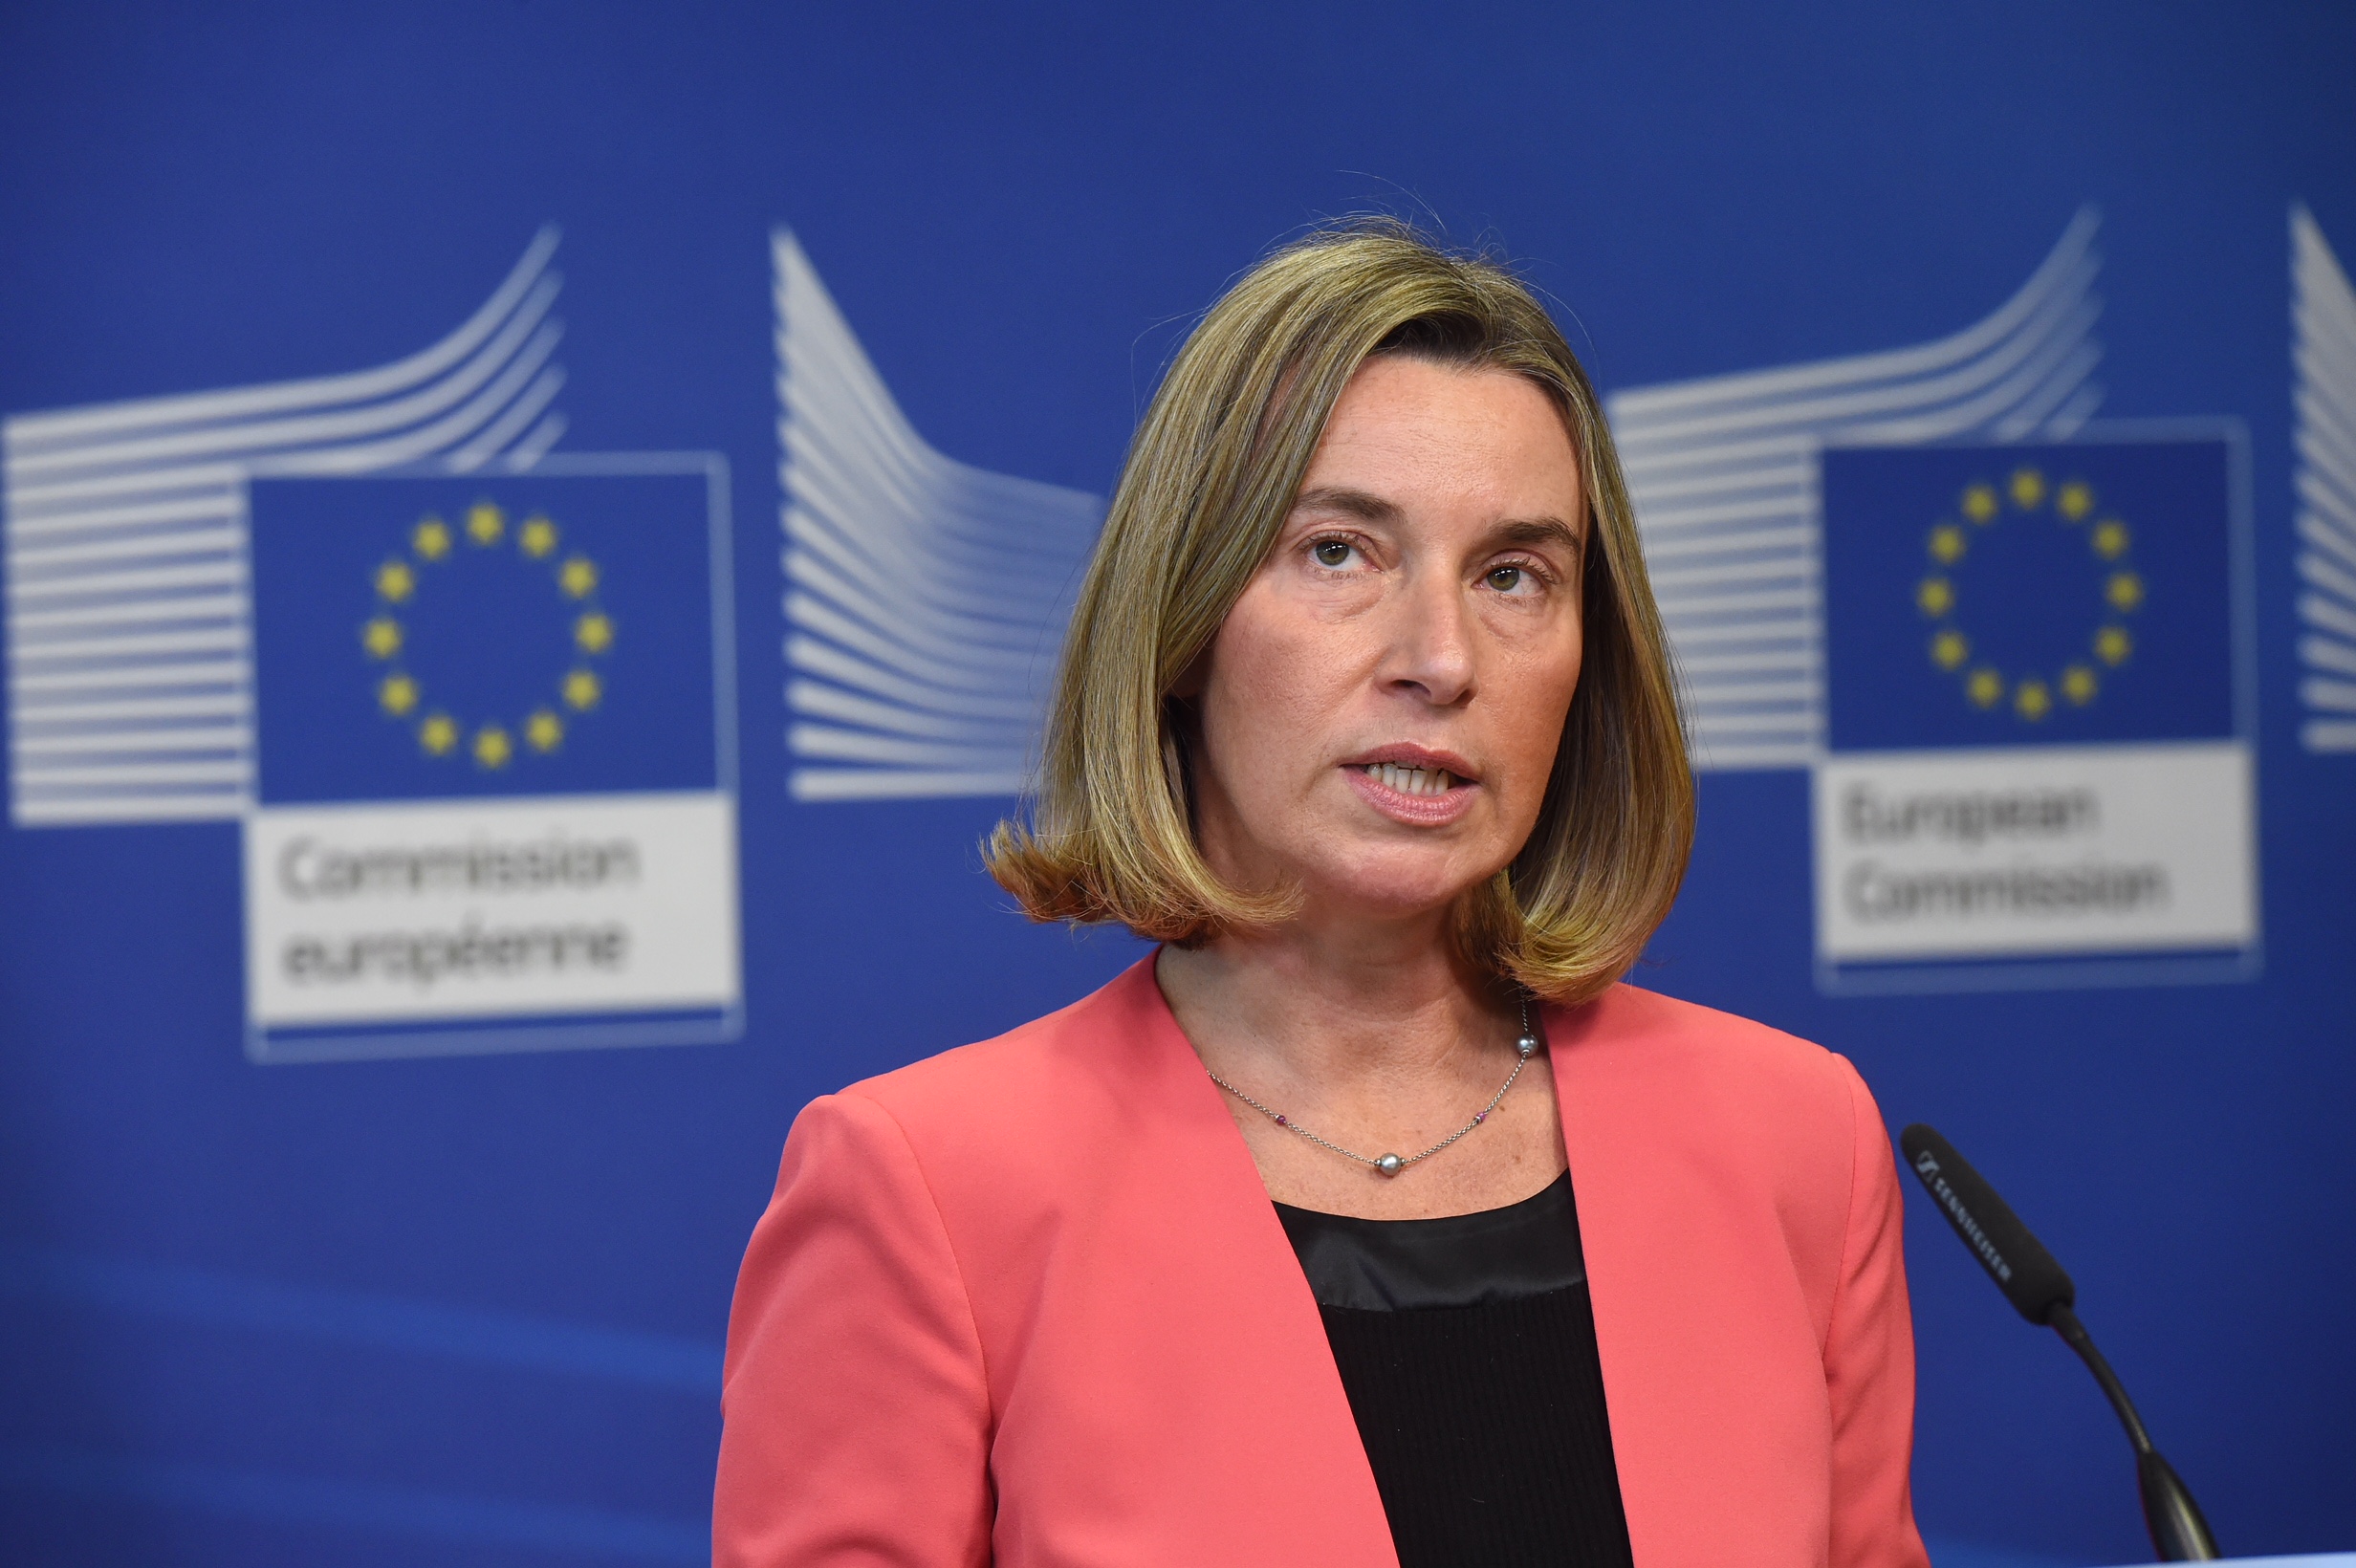 European Union High Representative for Foreign Affairs and Security Policy and Vice-President of the European Commission Federica Mogherini